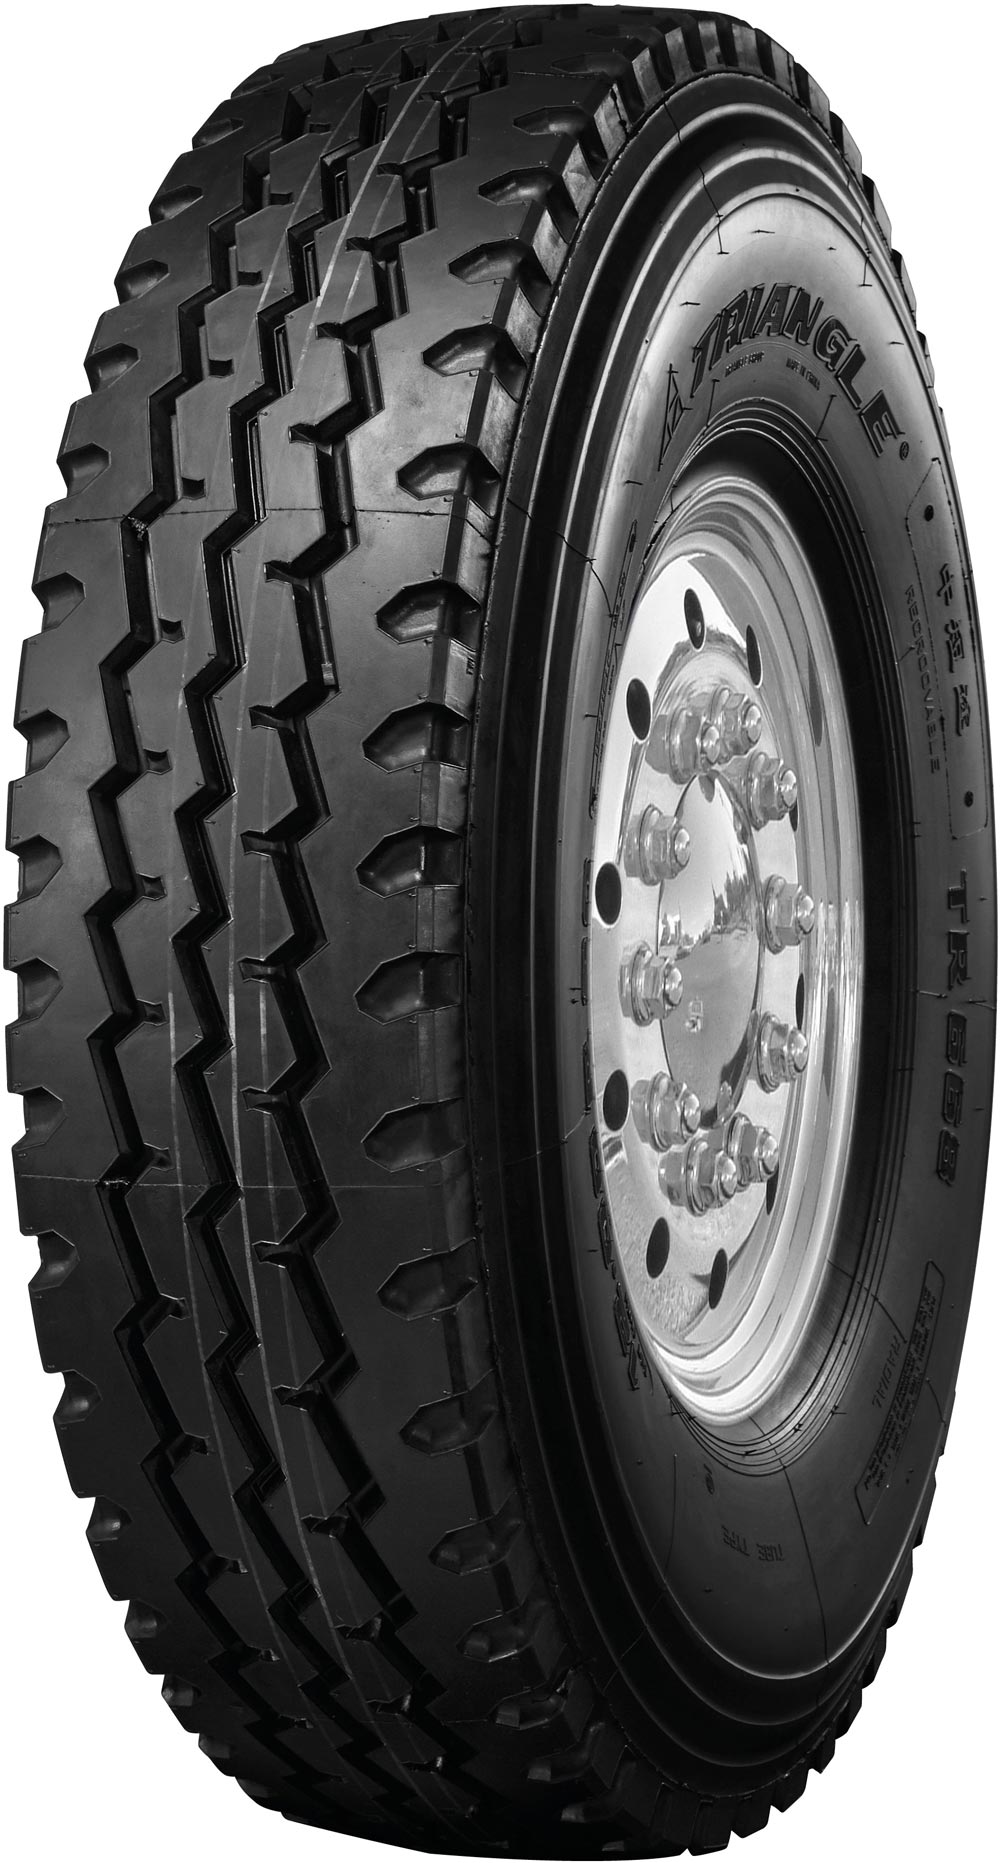 product_type-heavy_tires Triangle TR668 16PR 11 R24.5 149M